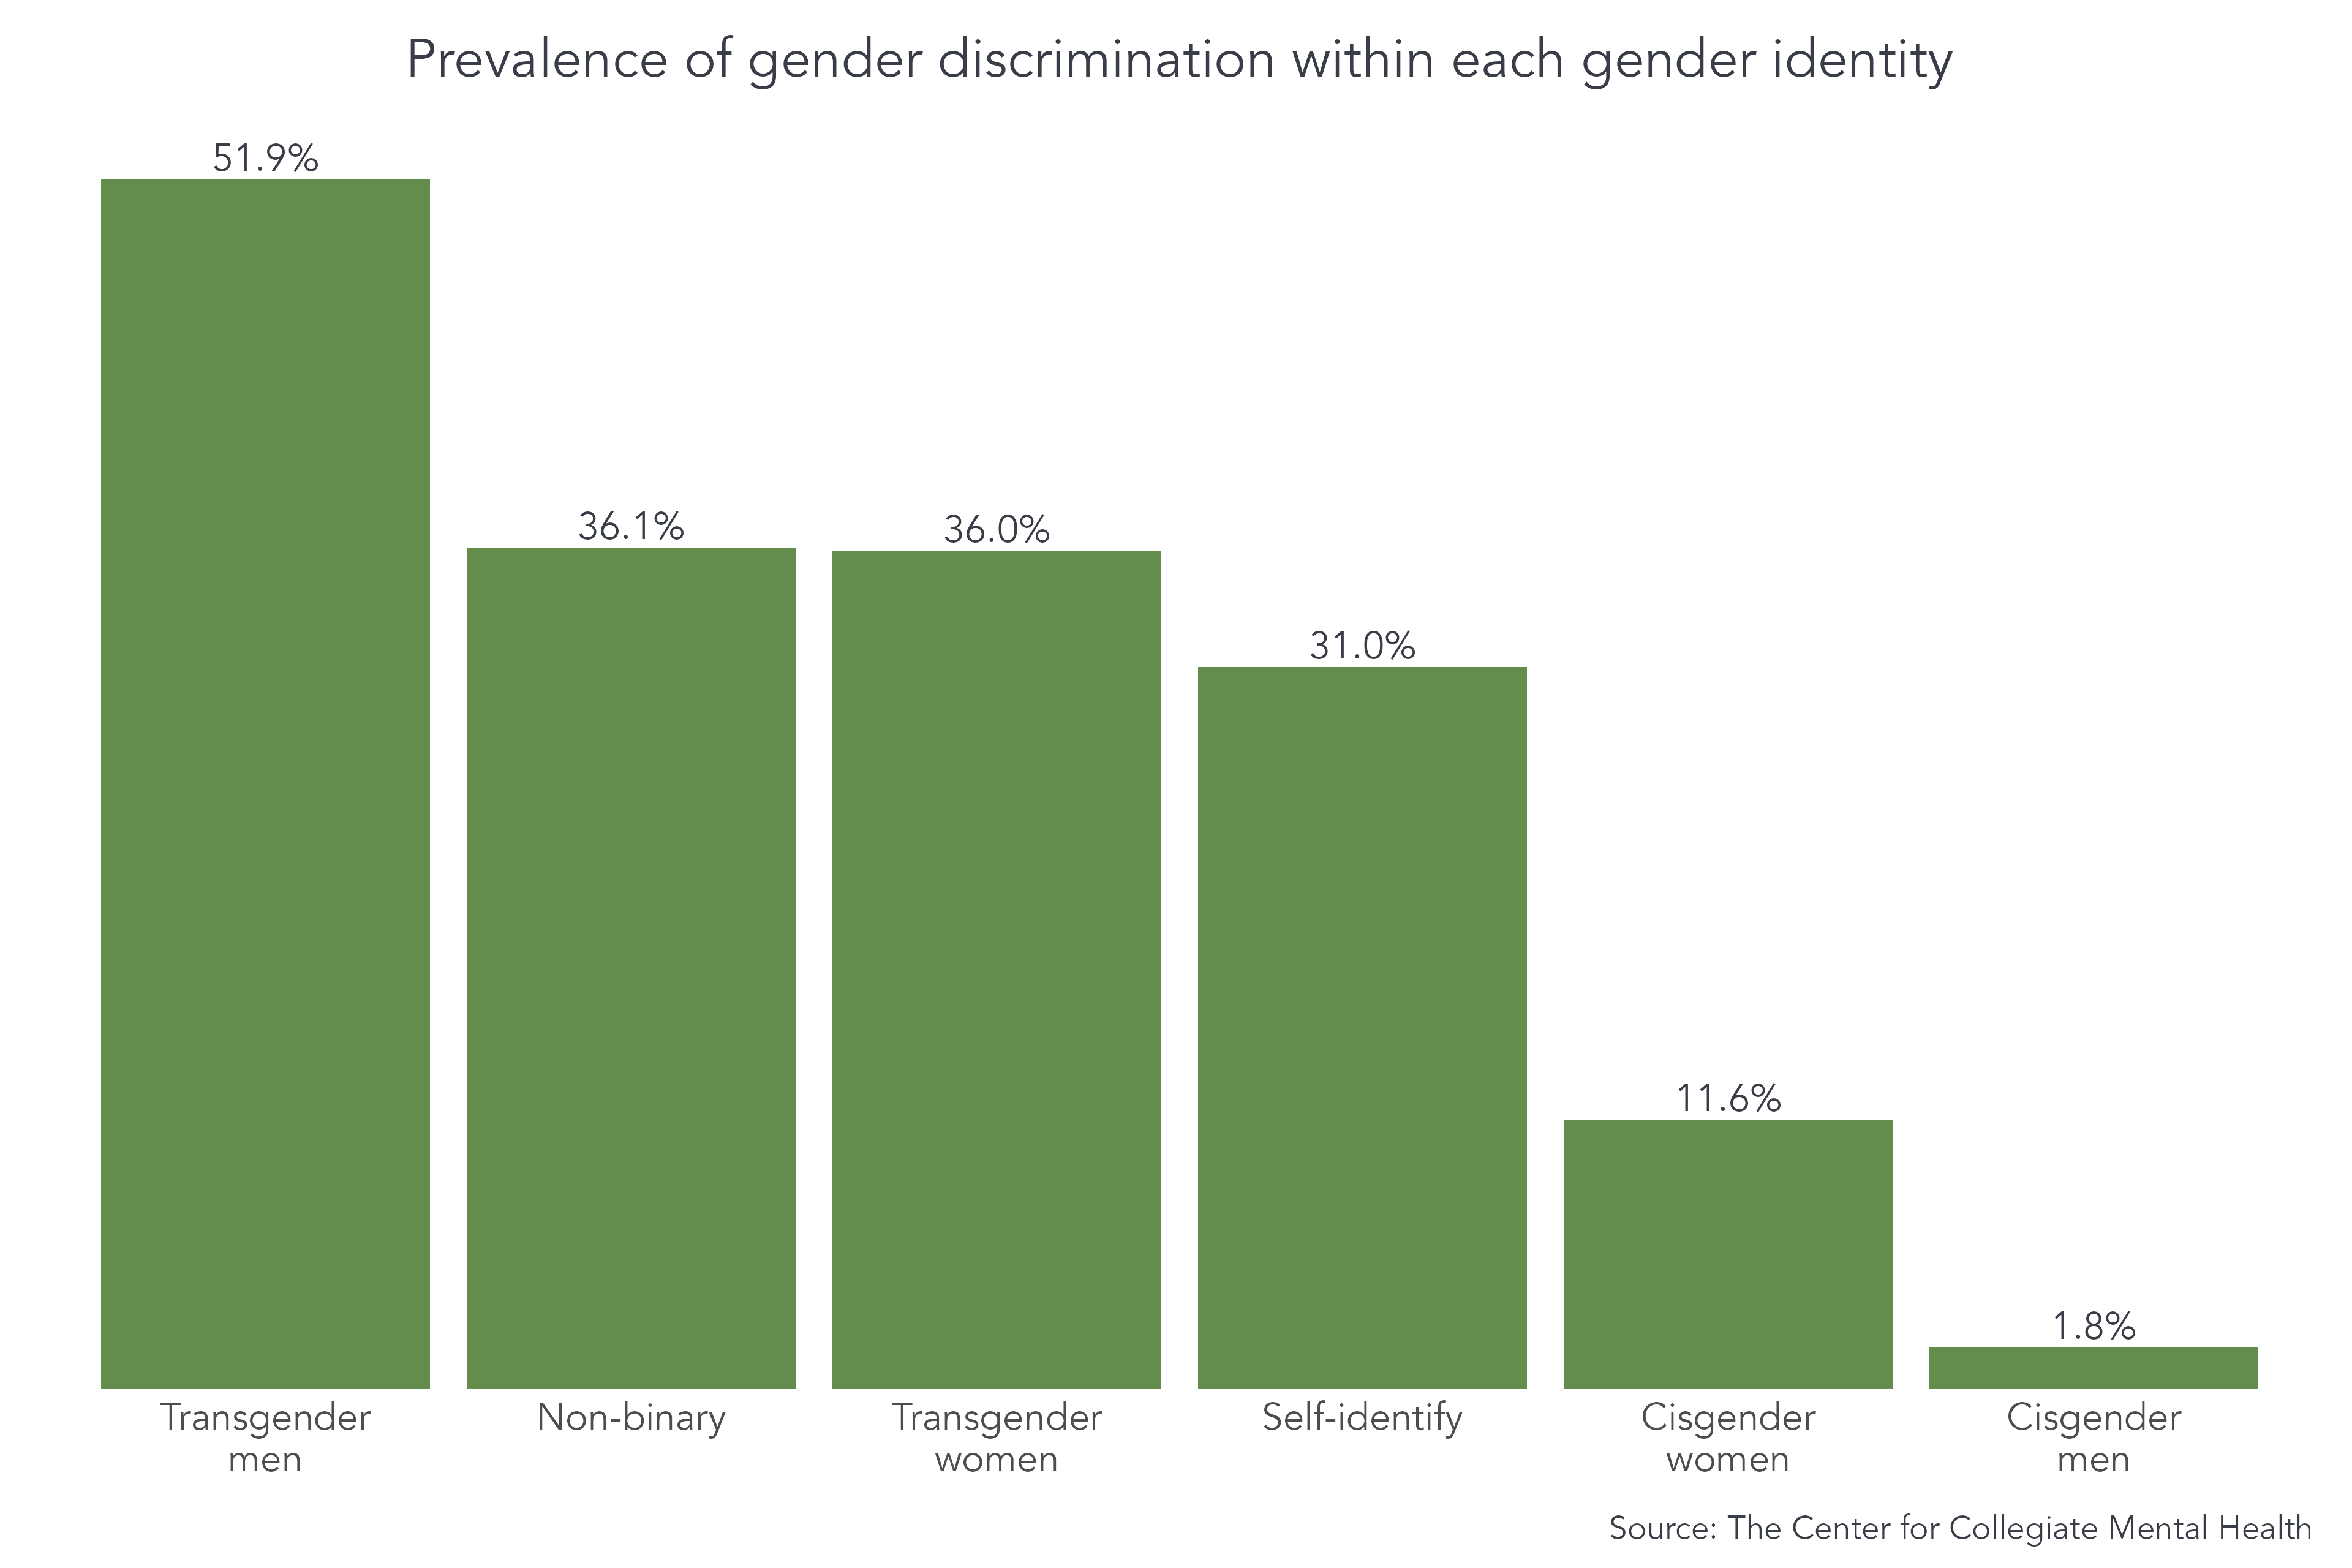 Transgender men reported the greatest rates of gender discrimination at 51.9%, followed by students who identify as non-binary, transgender women, and self-identify, which ranged from 36.1% to 31.0%.  